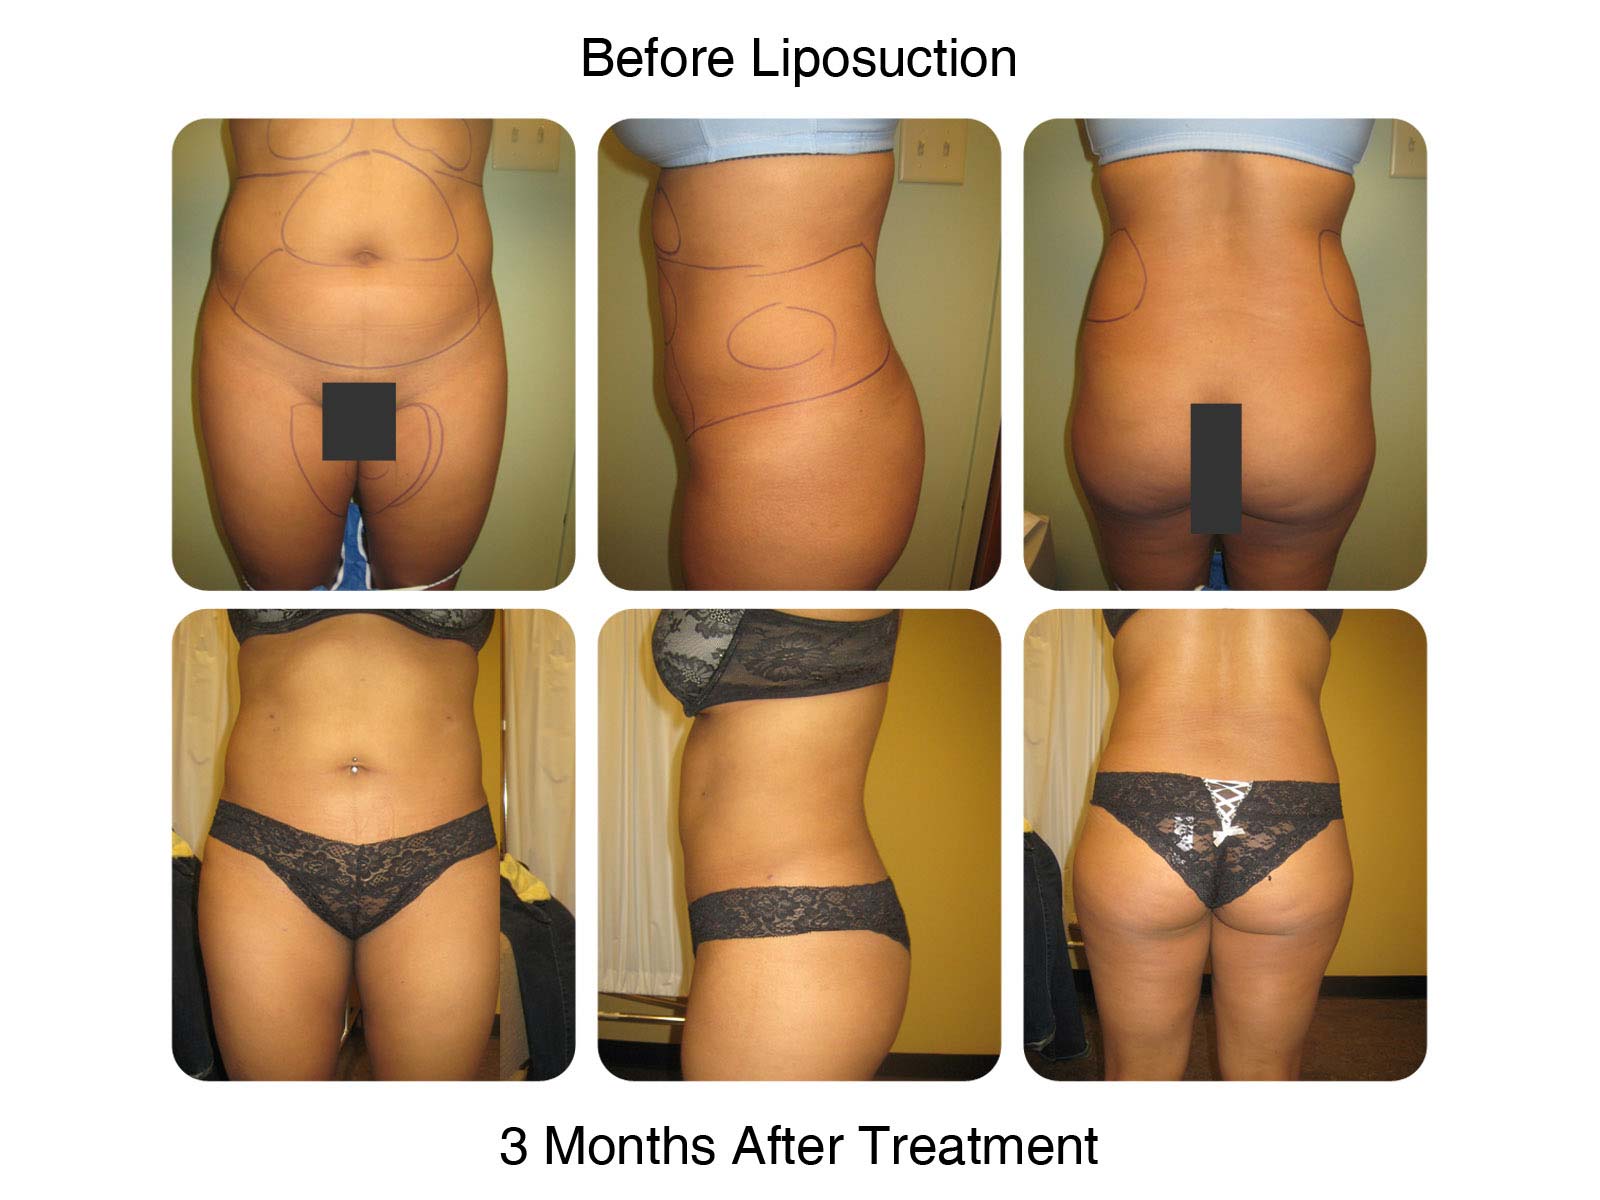 Liposuction - Before and 3 Months After